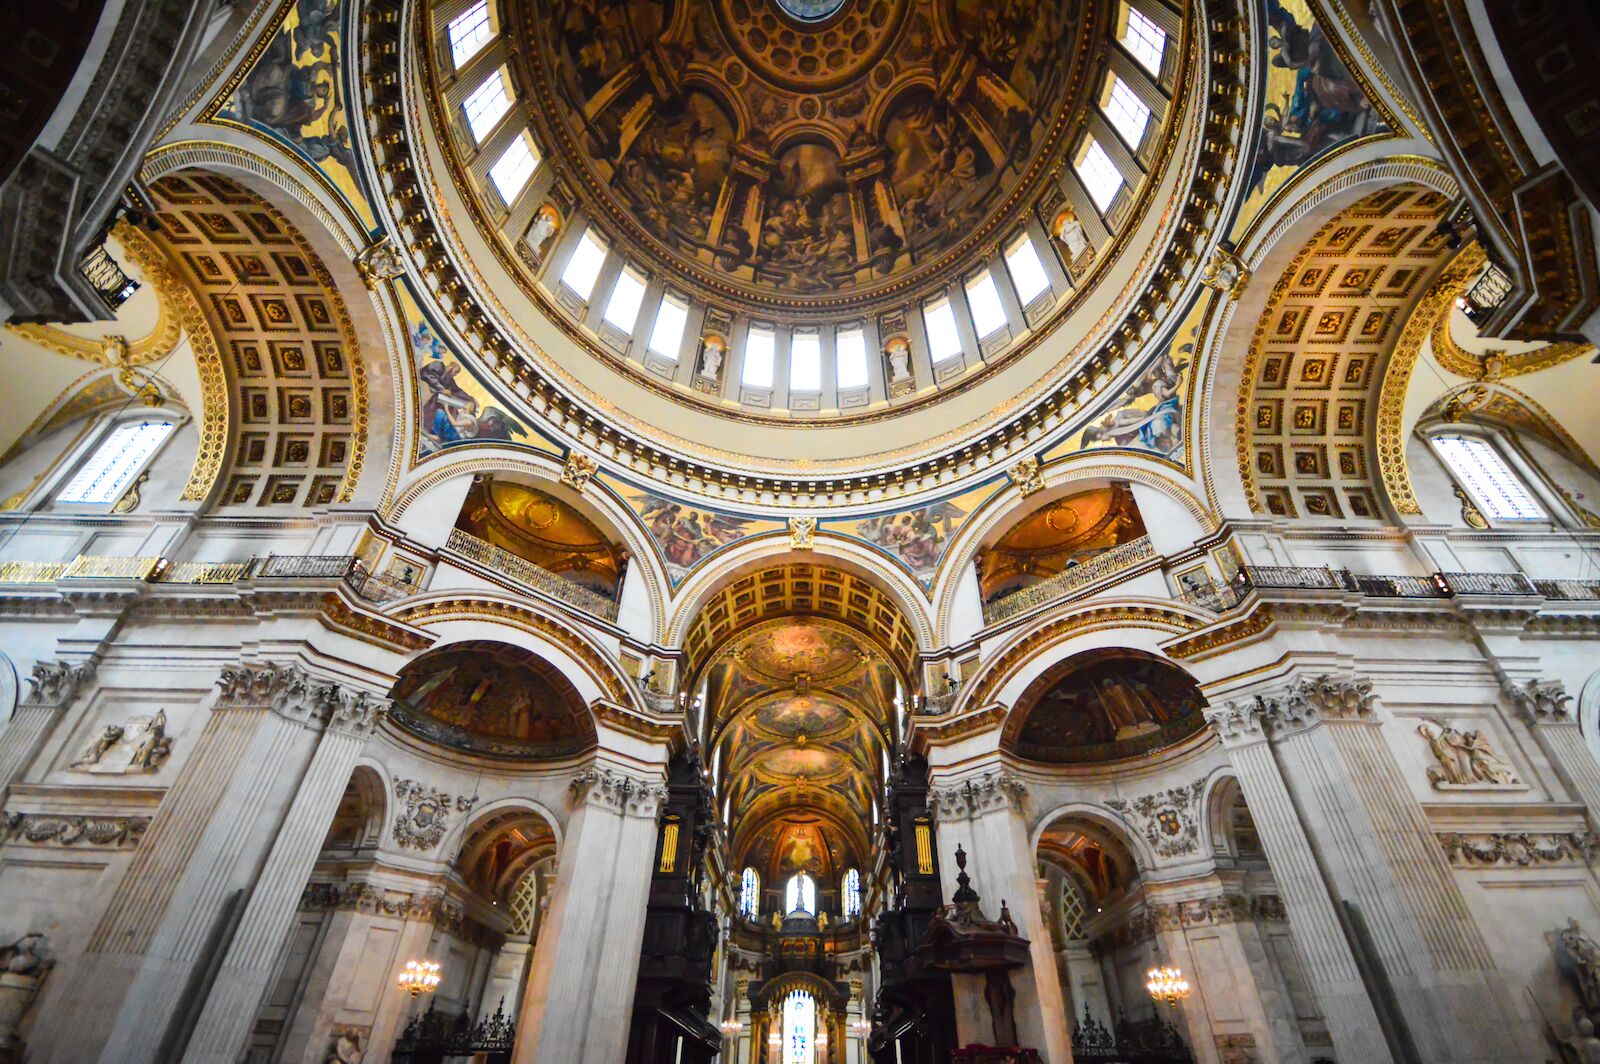 Inside St Paul's Cathedral in London